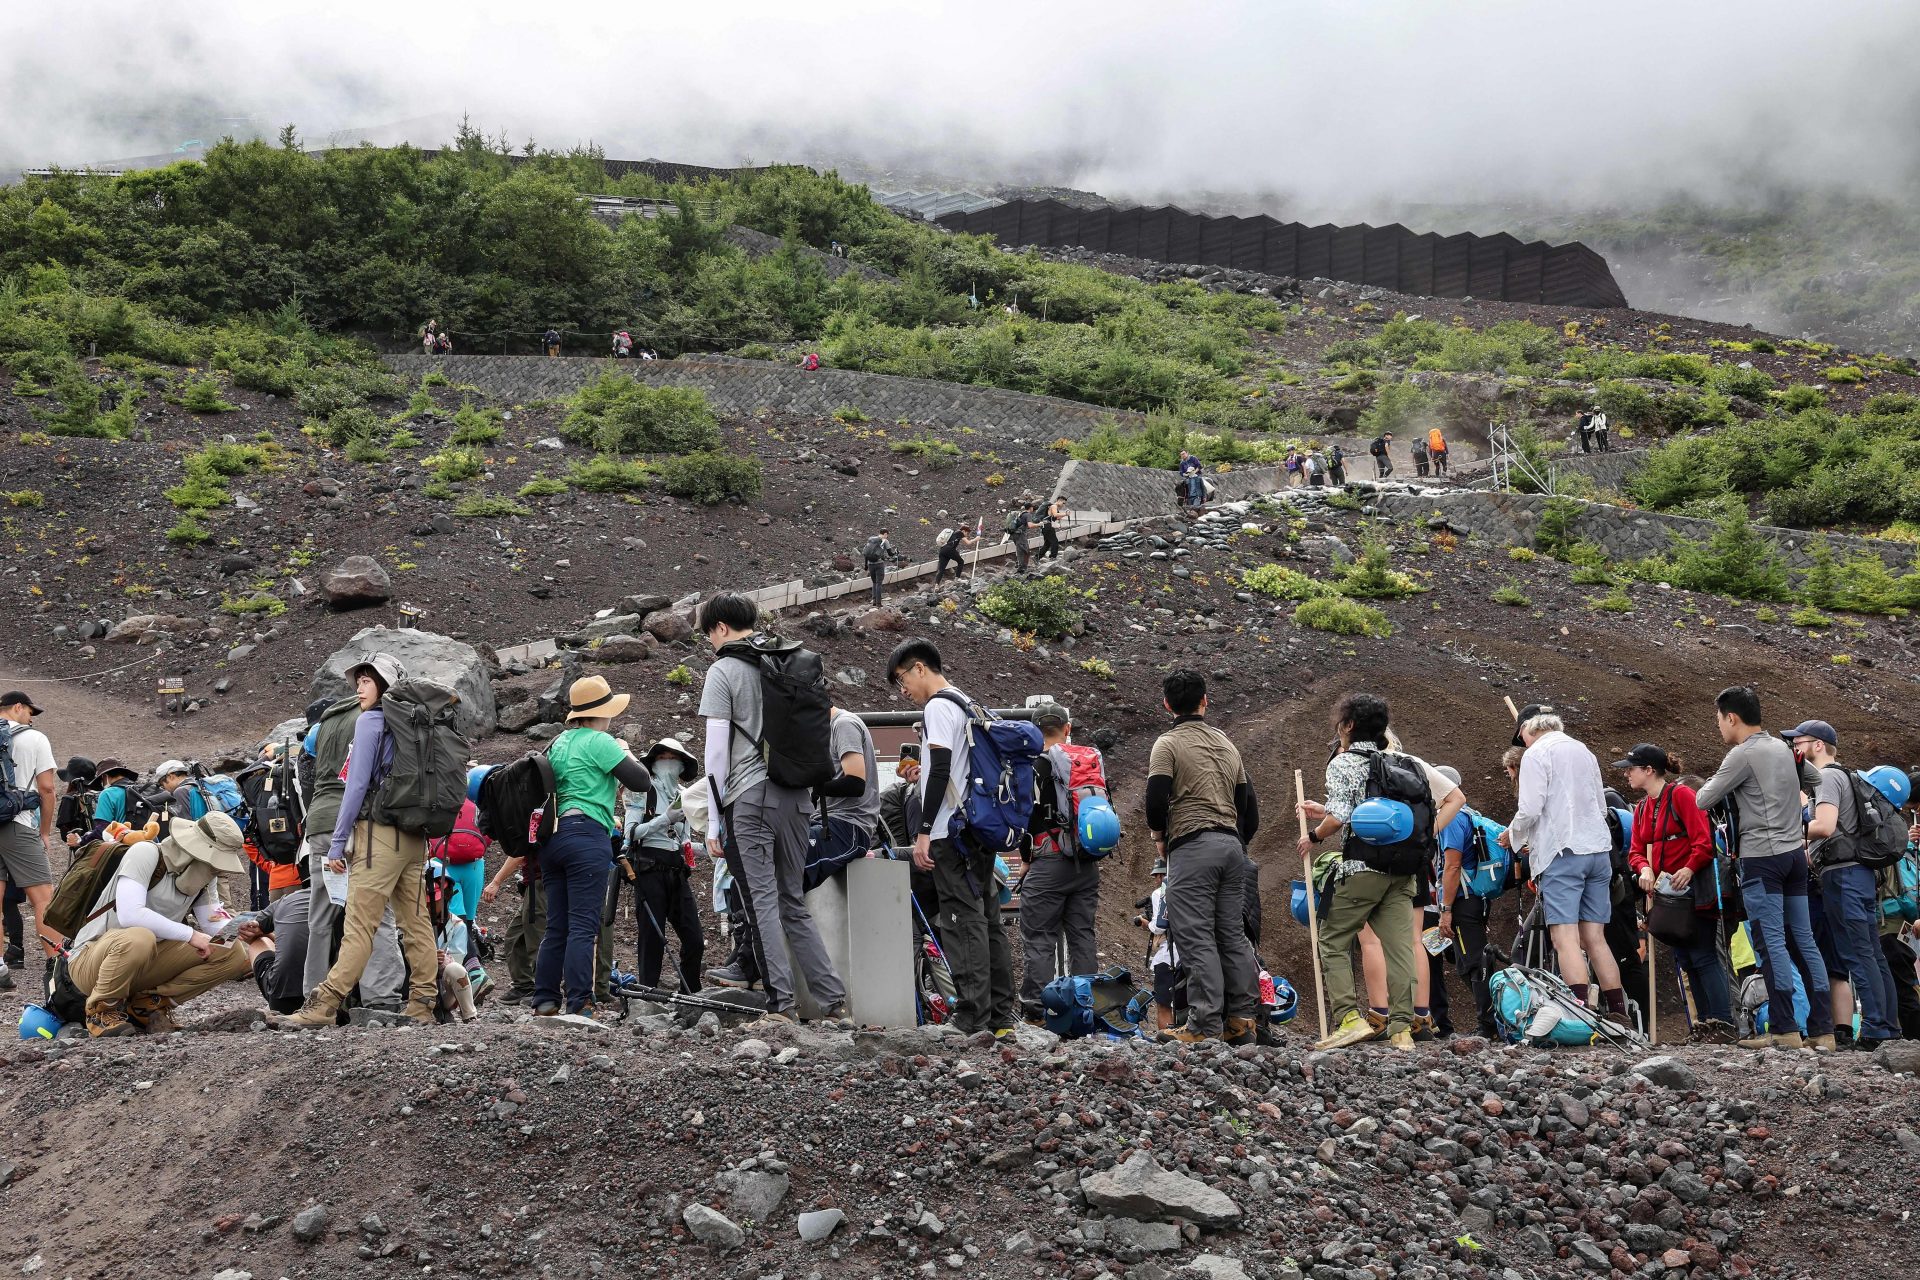 <p>According to The Guardian, starting this summer, the most popular route to climb Mount Fuji will be charged. Tourists will pay around 15 dollars to access it, with capped passes to avoid clutter.</p>